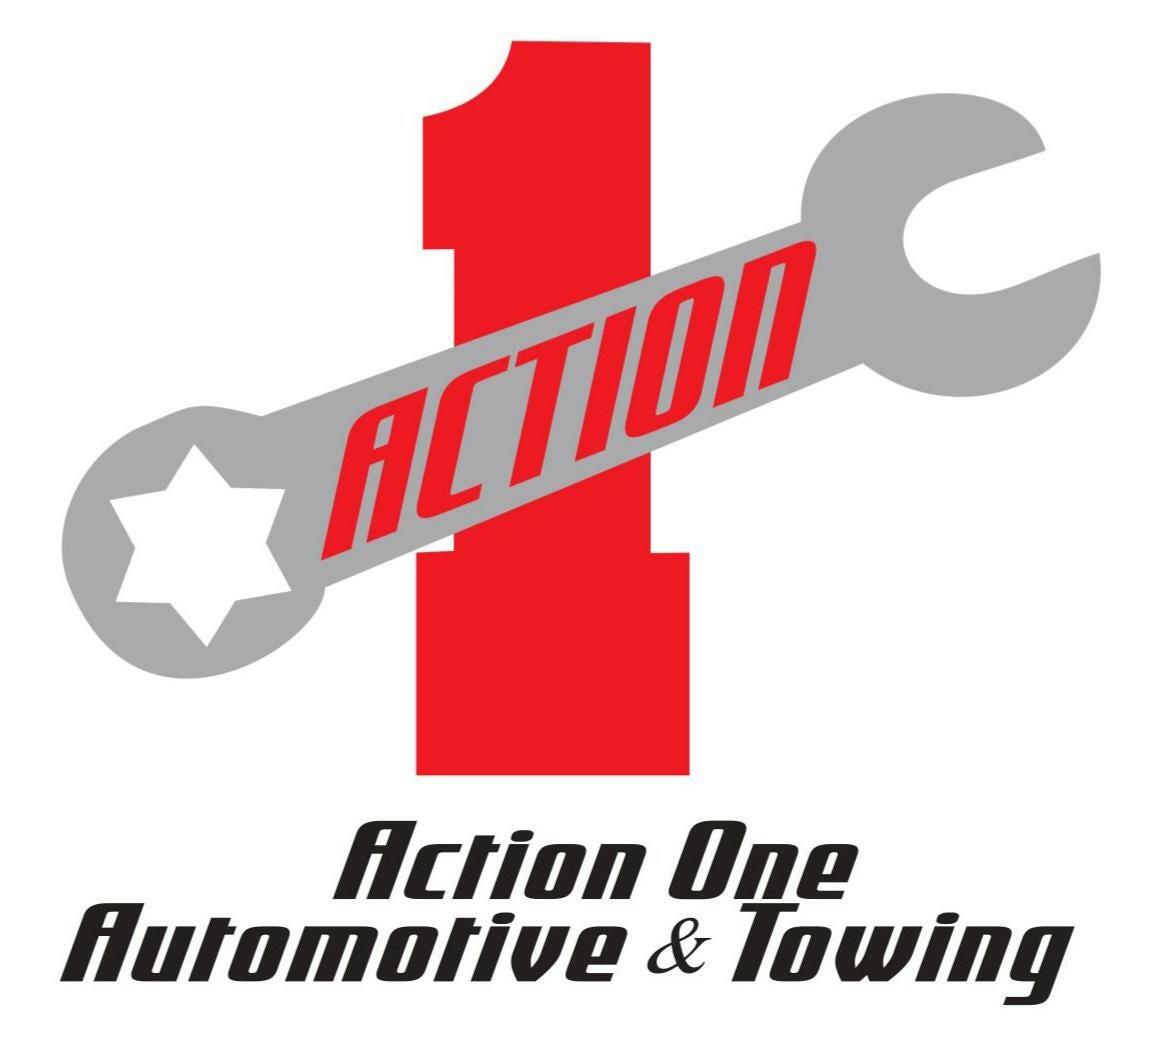 Action One Automotive & Towing